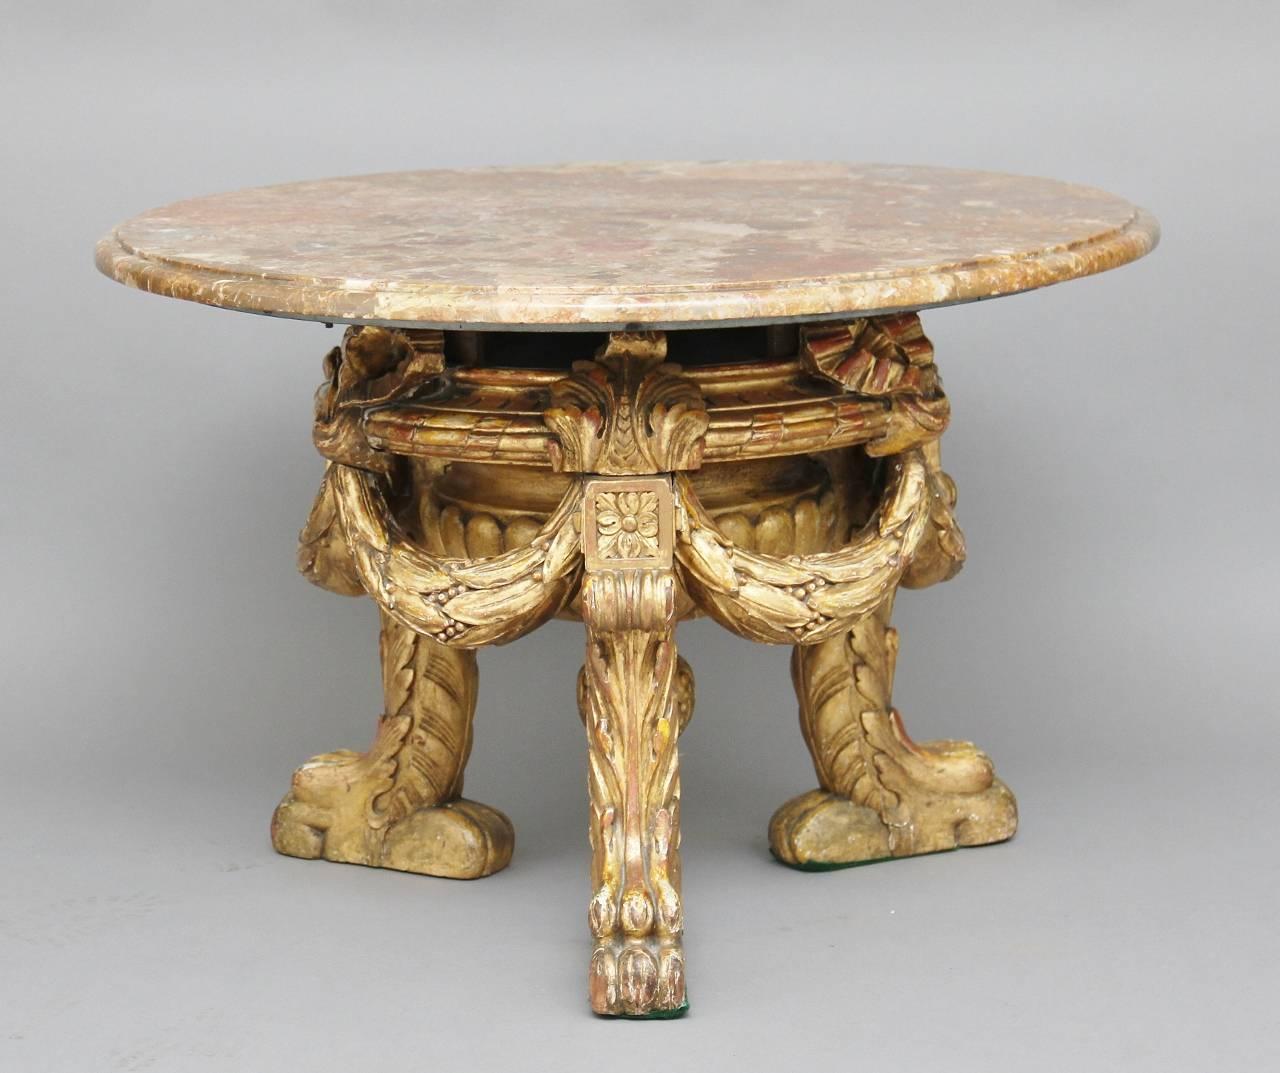 Mid-20th century Italian occasional / coffee table with a veined marble top with a moulded edge, the base made from giltwood which is heavily carved, decorated with swags which are united with the legs, standing on lion feet, circa 1960.